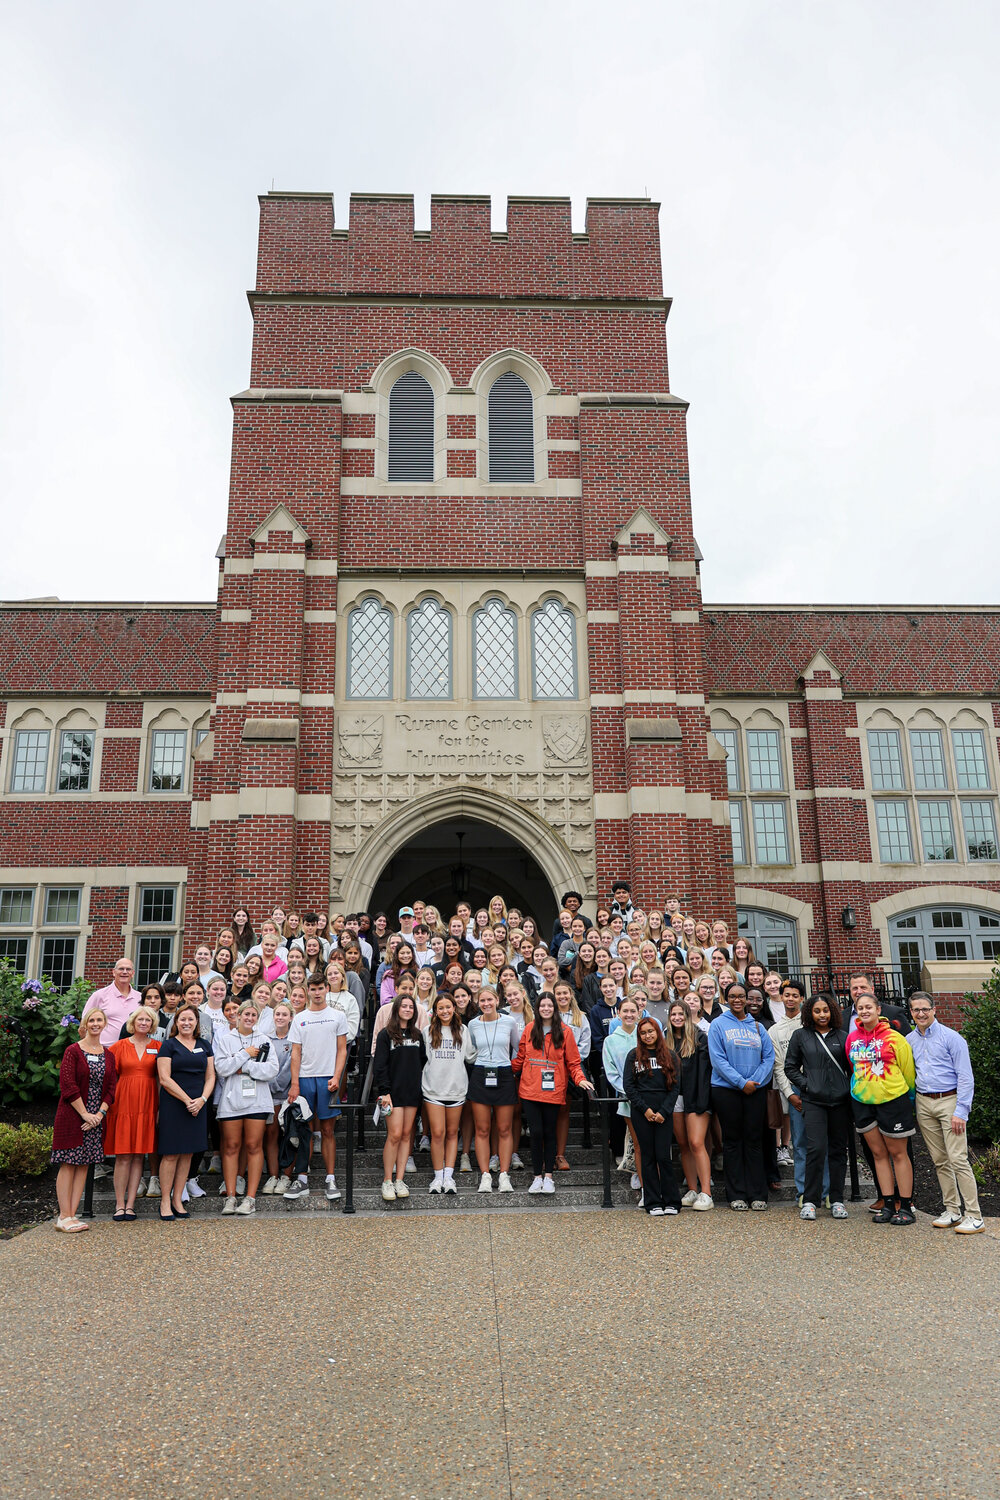 The Class of 2027 made history with its arrival at Providence College on Thursday, August 24, 2023. Its 1,200 members — the largest class in college history — include the first students who will study nursing and health sciences, pictured above.